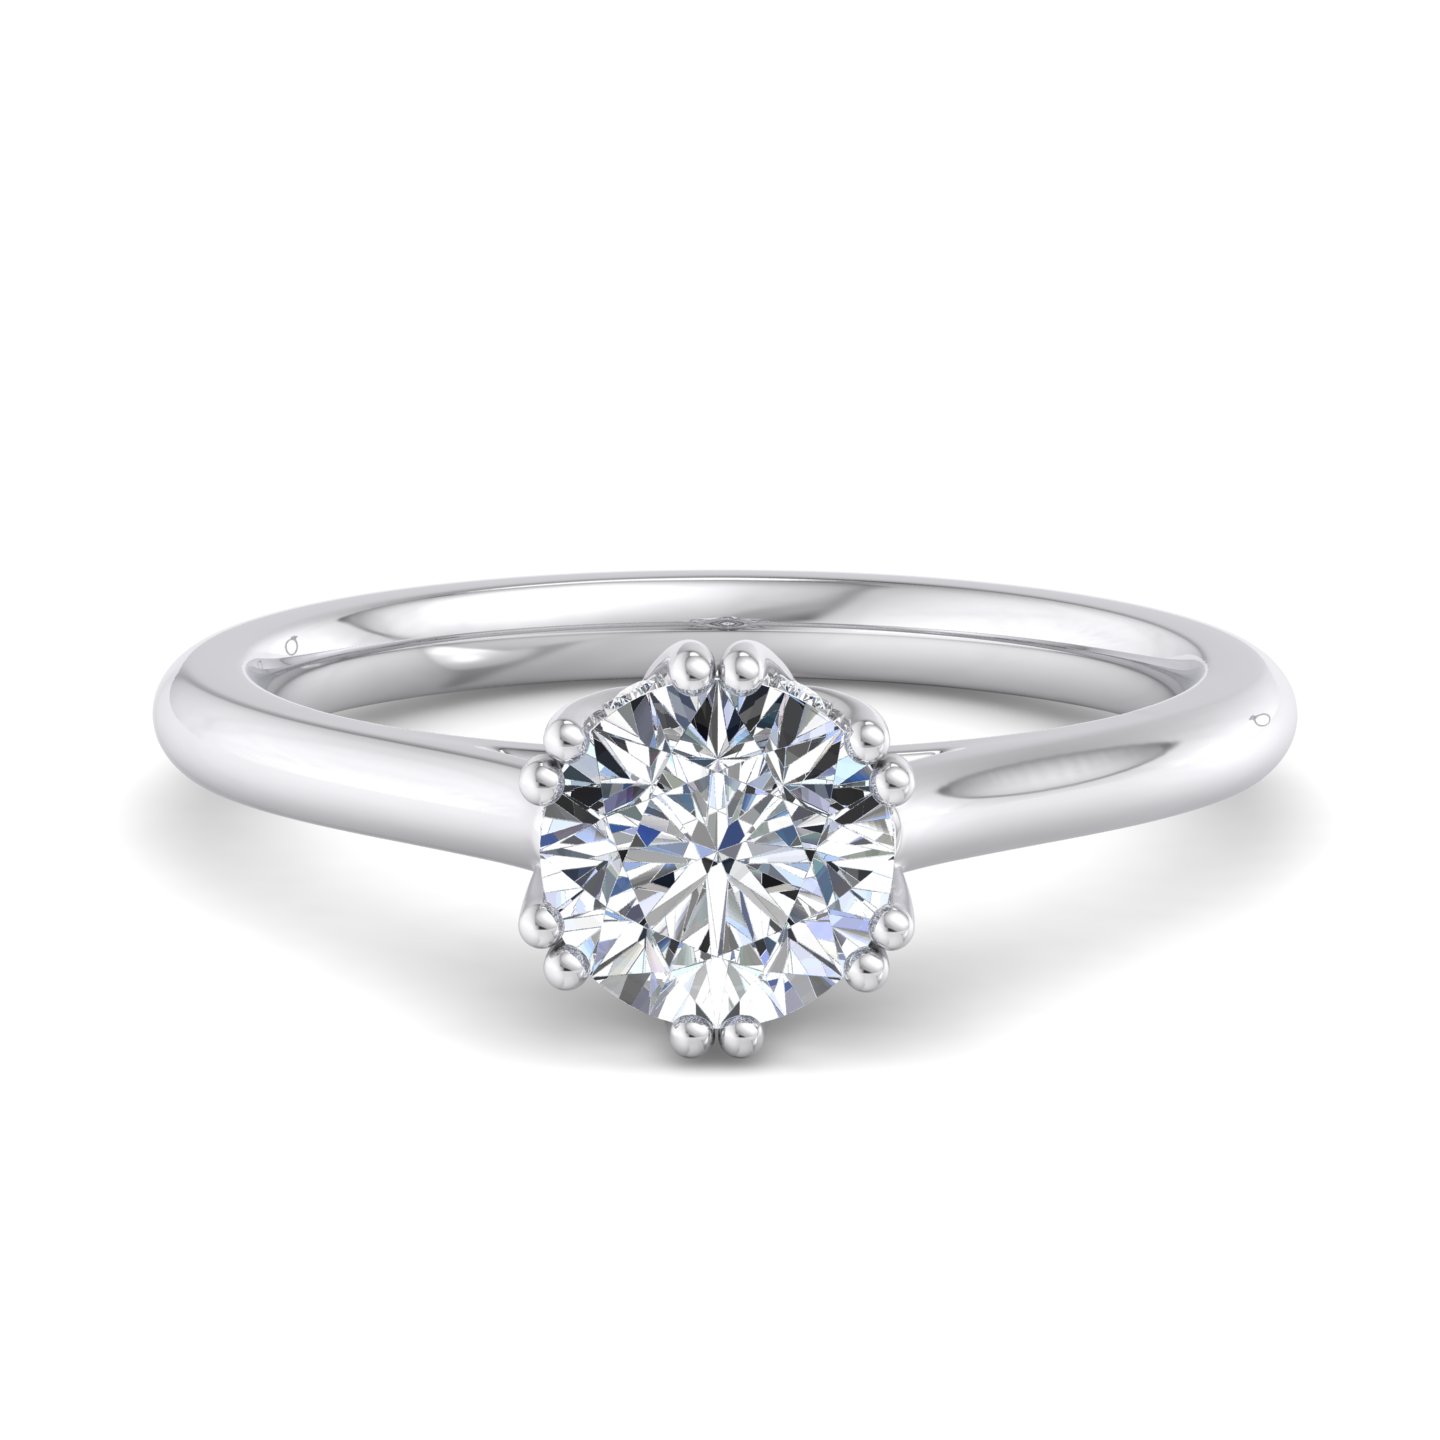 Londyn Solitaire engagement ring